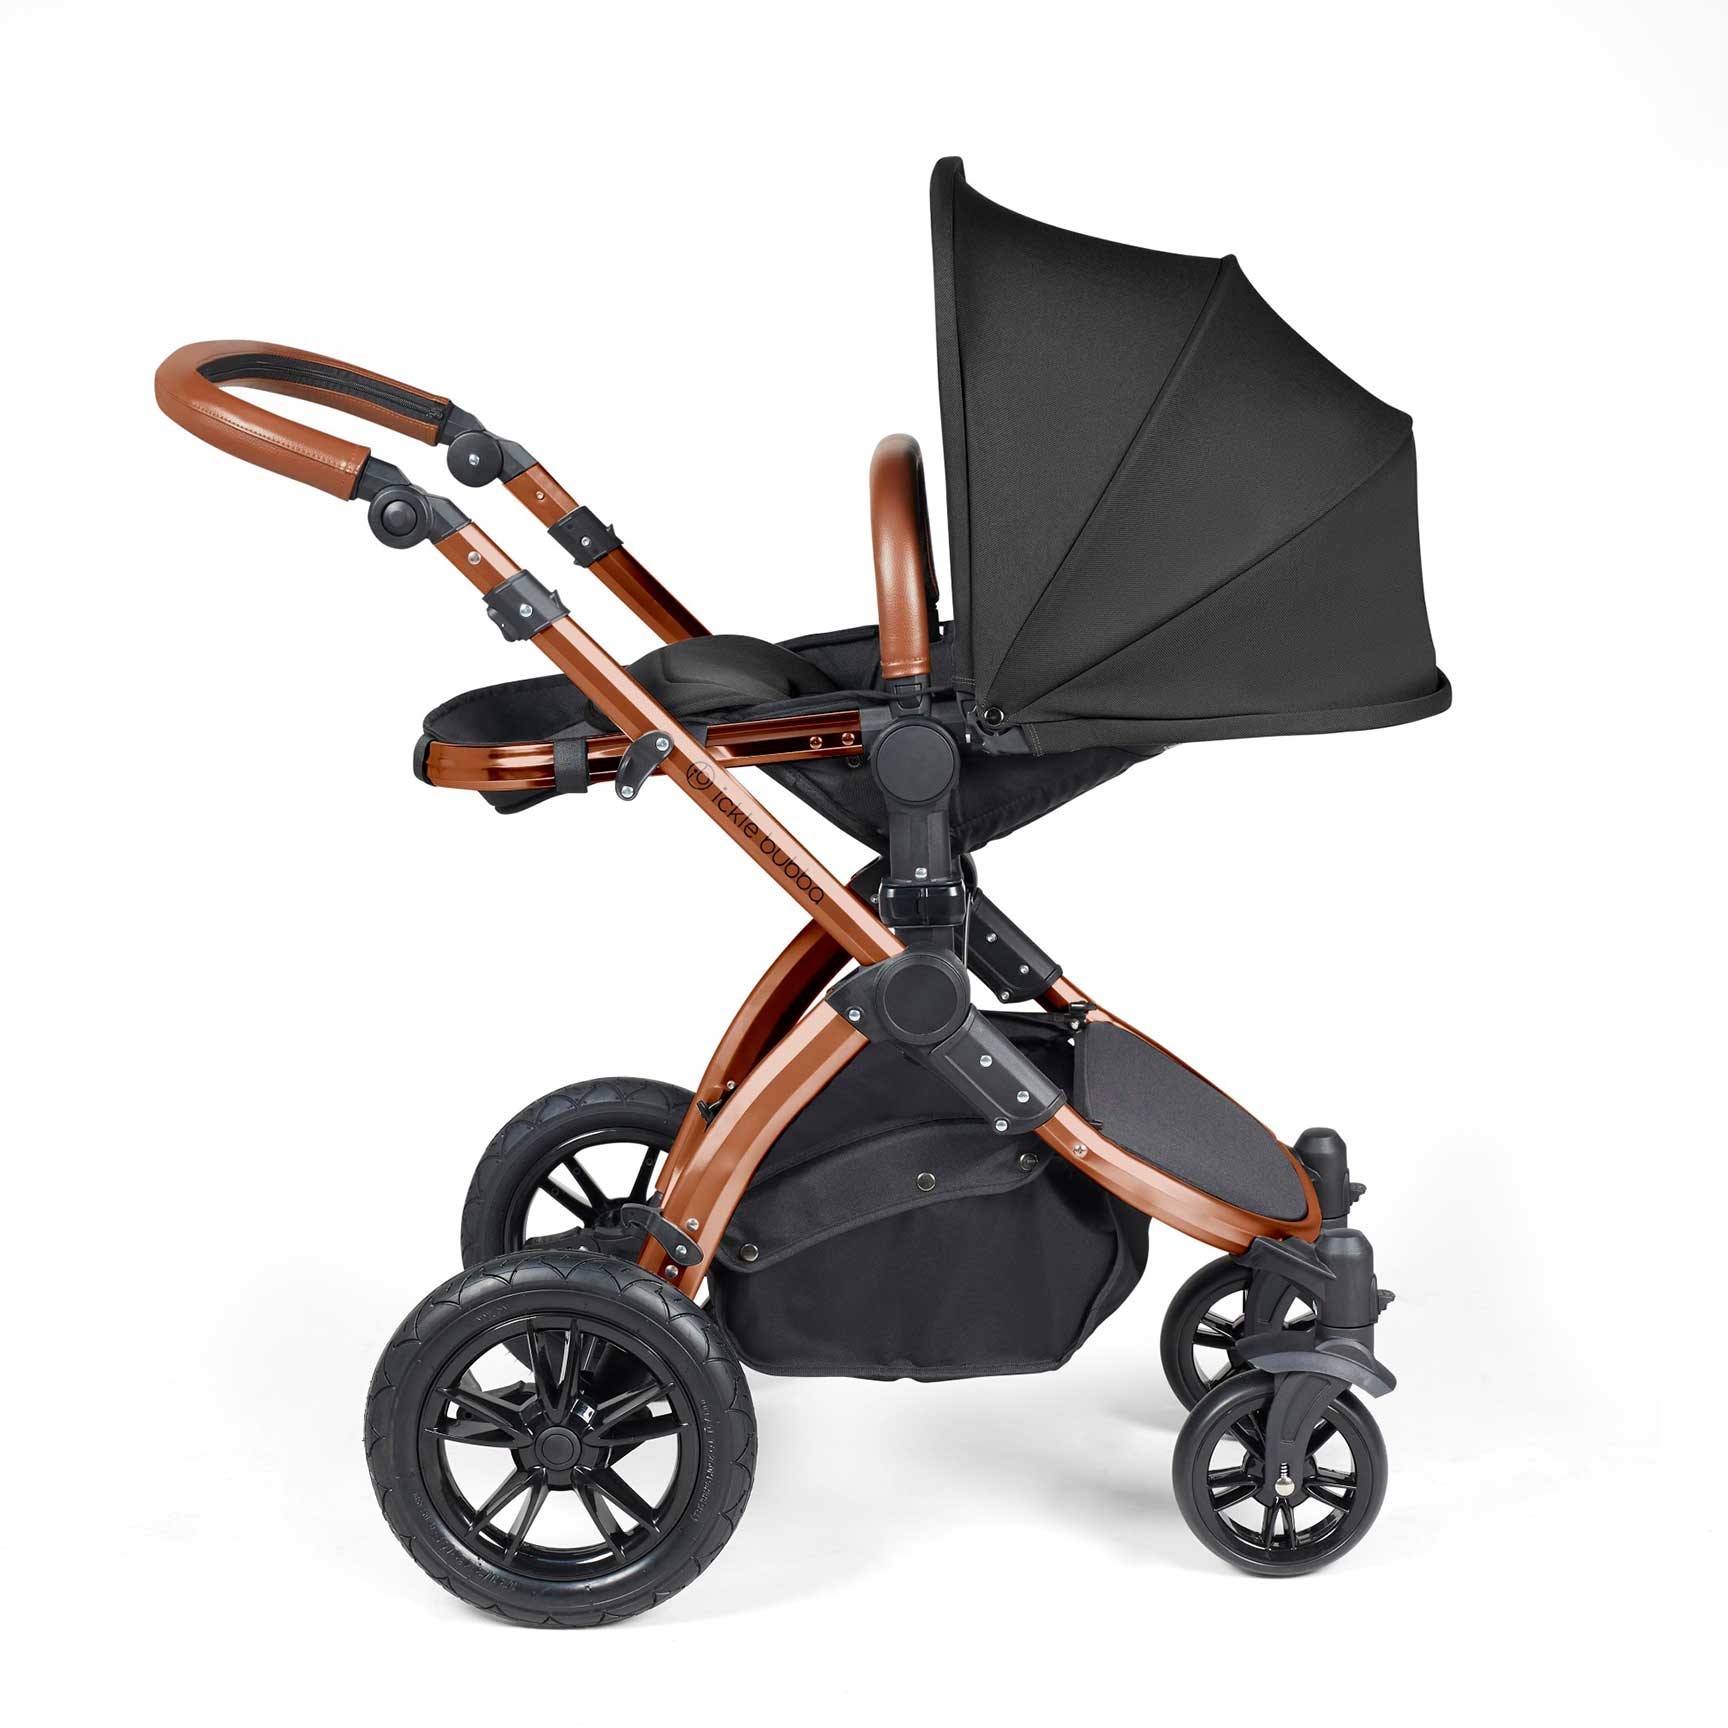 Ickle Bubba Stomp Luxe 2-in-1 Plus Pushchair & Carrycot in Bronze/Midnight/Tan Travel Systems 10-003-001-021 5056515026368